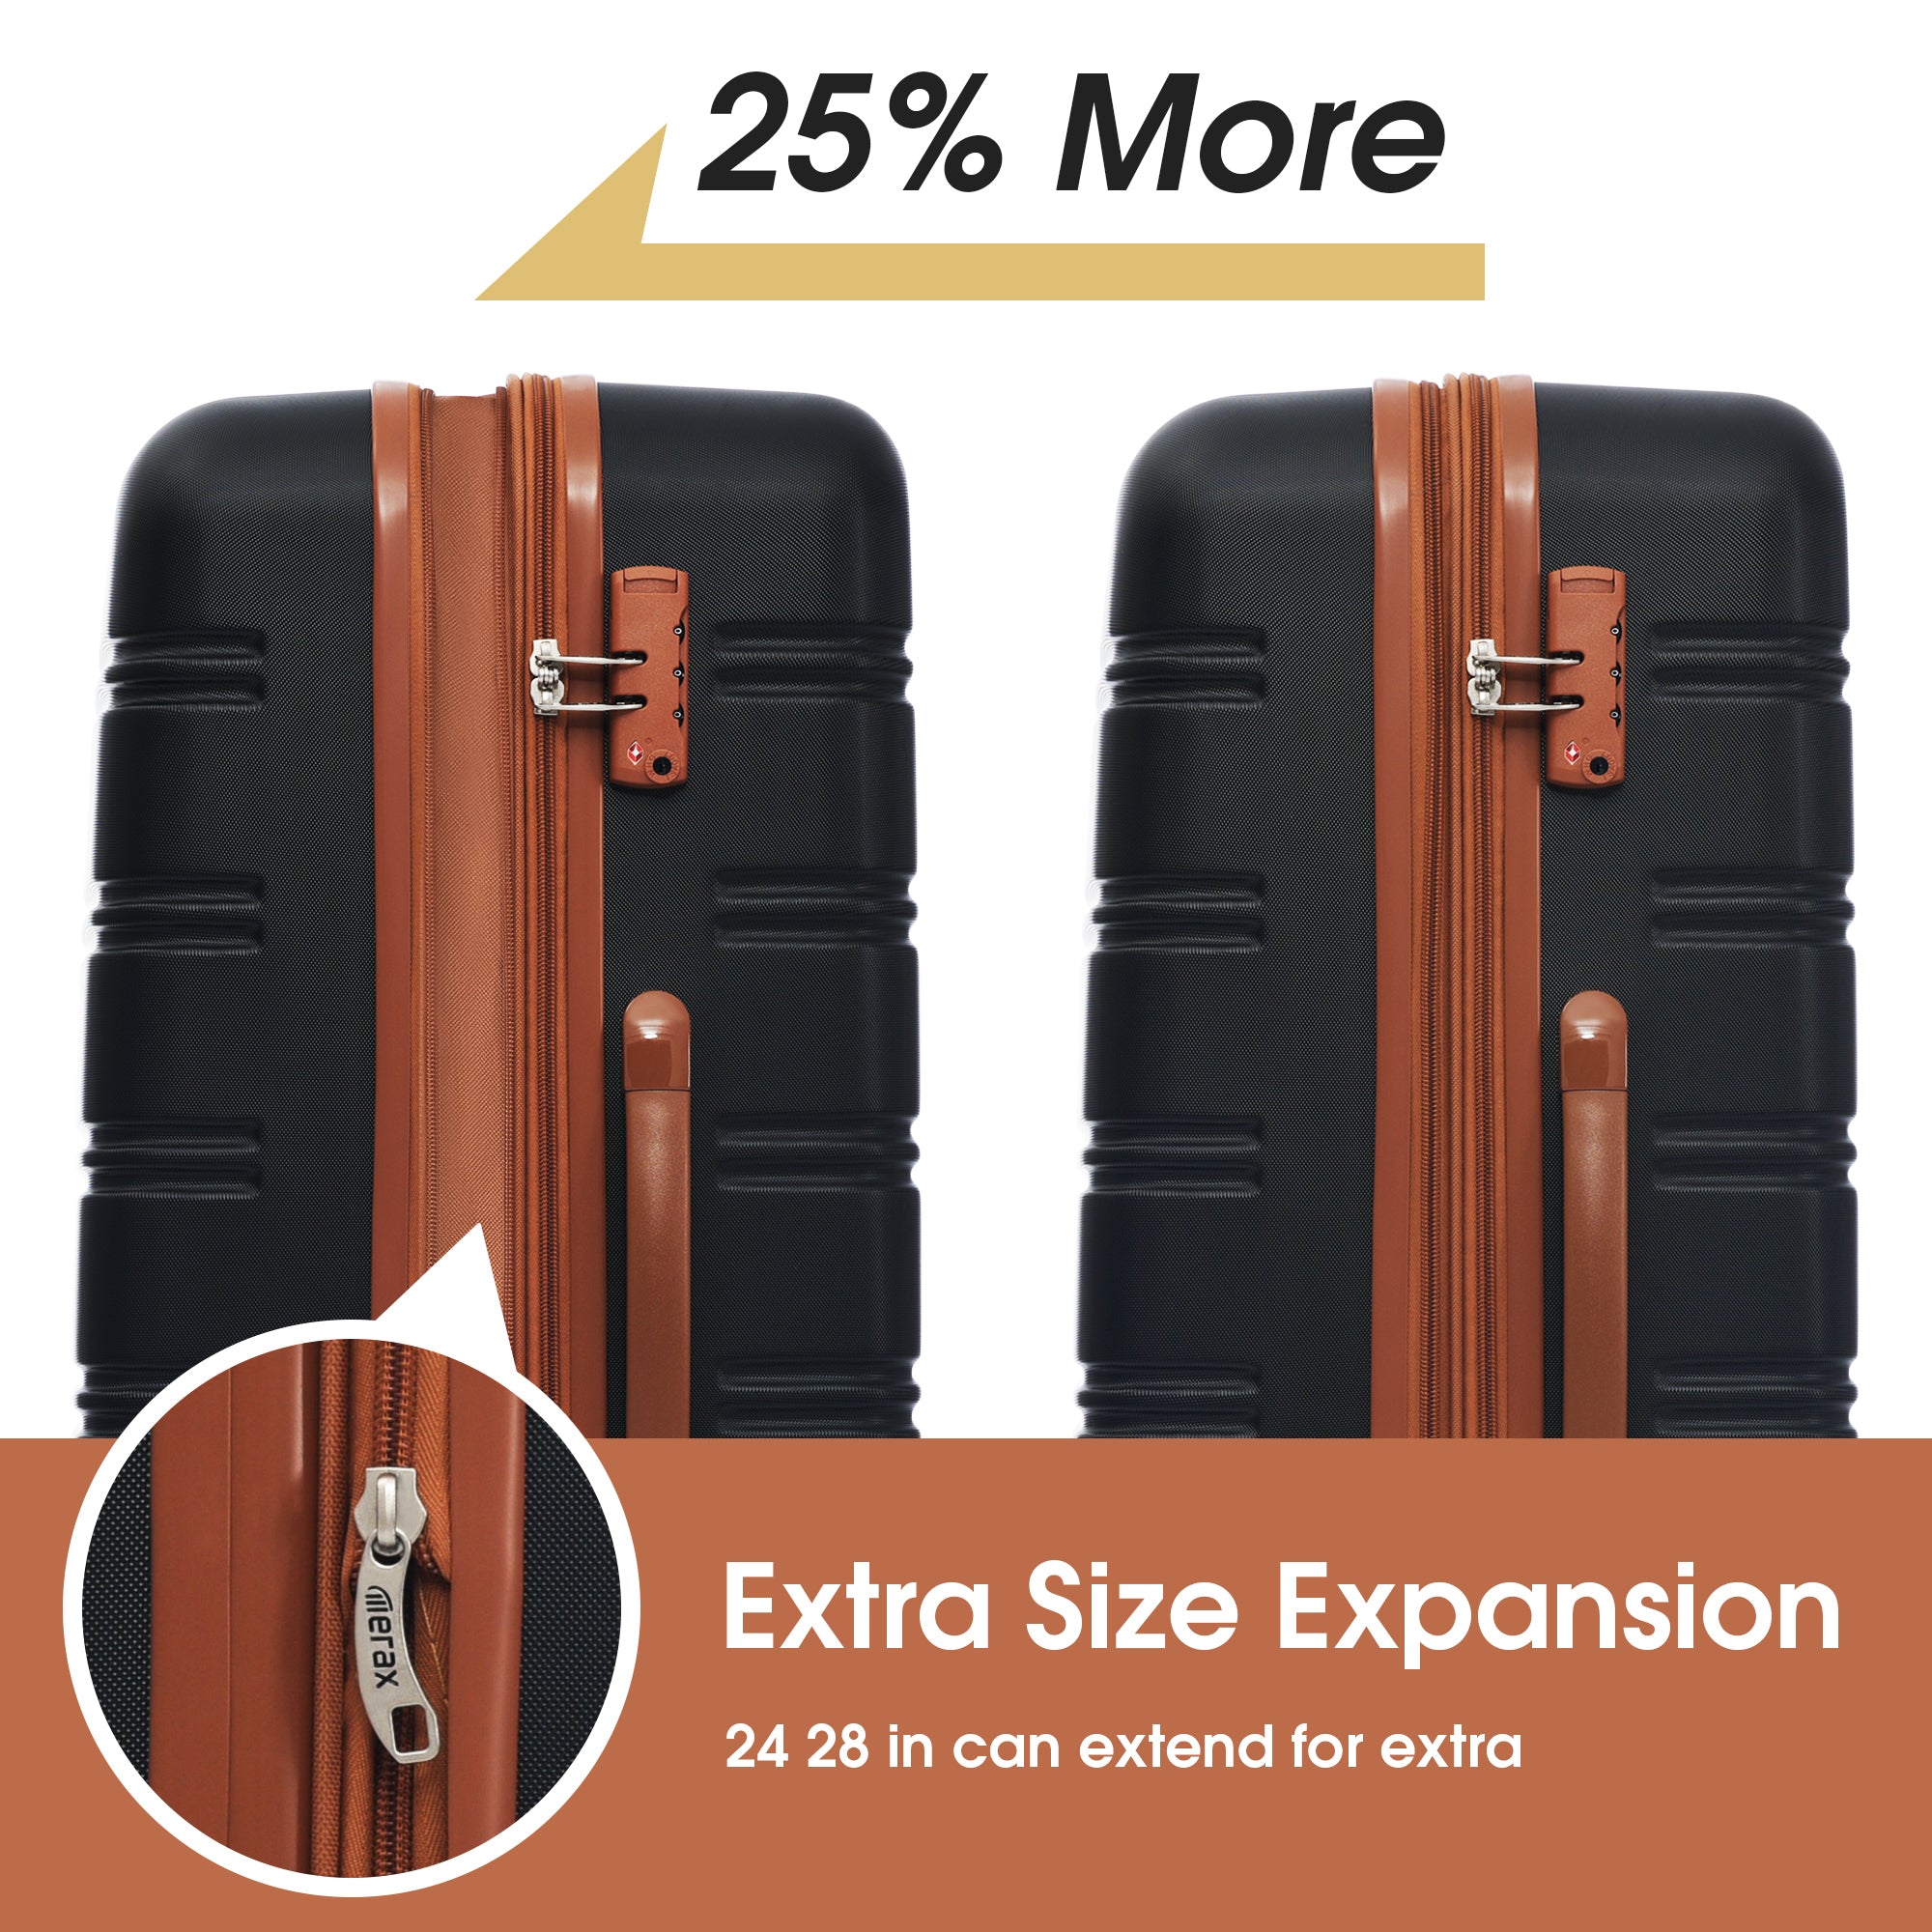 Hardshell Luggage Sets 2Pcs Bag Spinner Suitcase with black+brown-abs